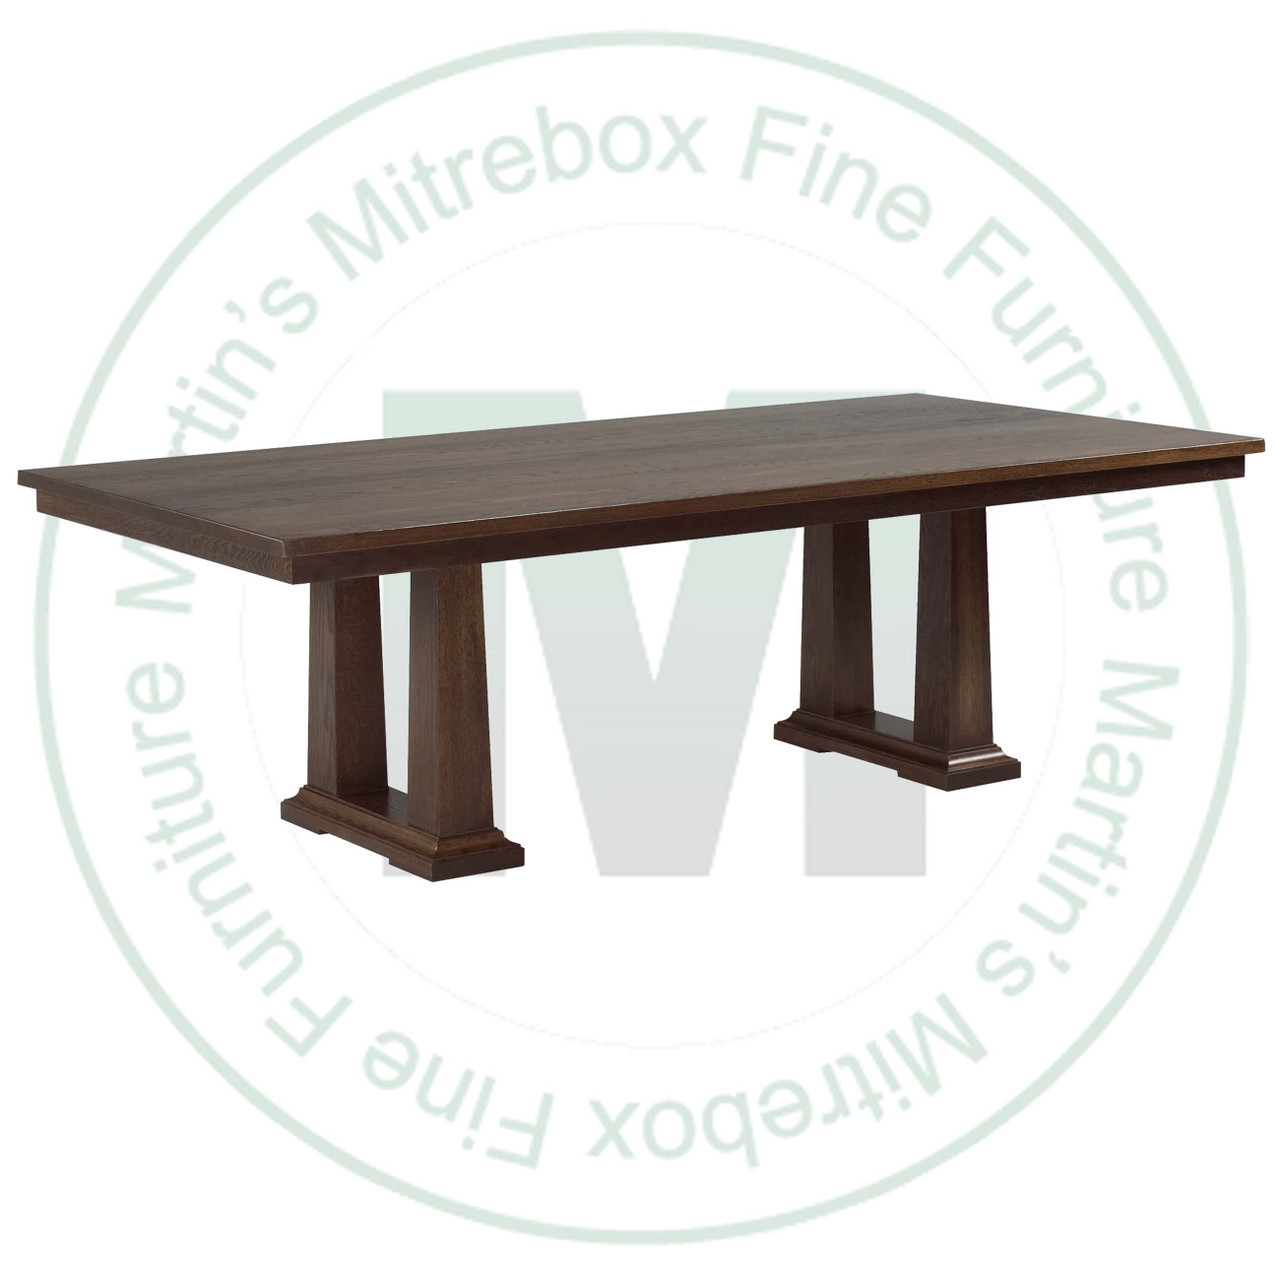 Maple Acropolis Extension Double Pedestal Table 54''D x 72''W x 30''H With 2 - 12'' Leaves Table Has 1.75'' Thick Top